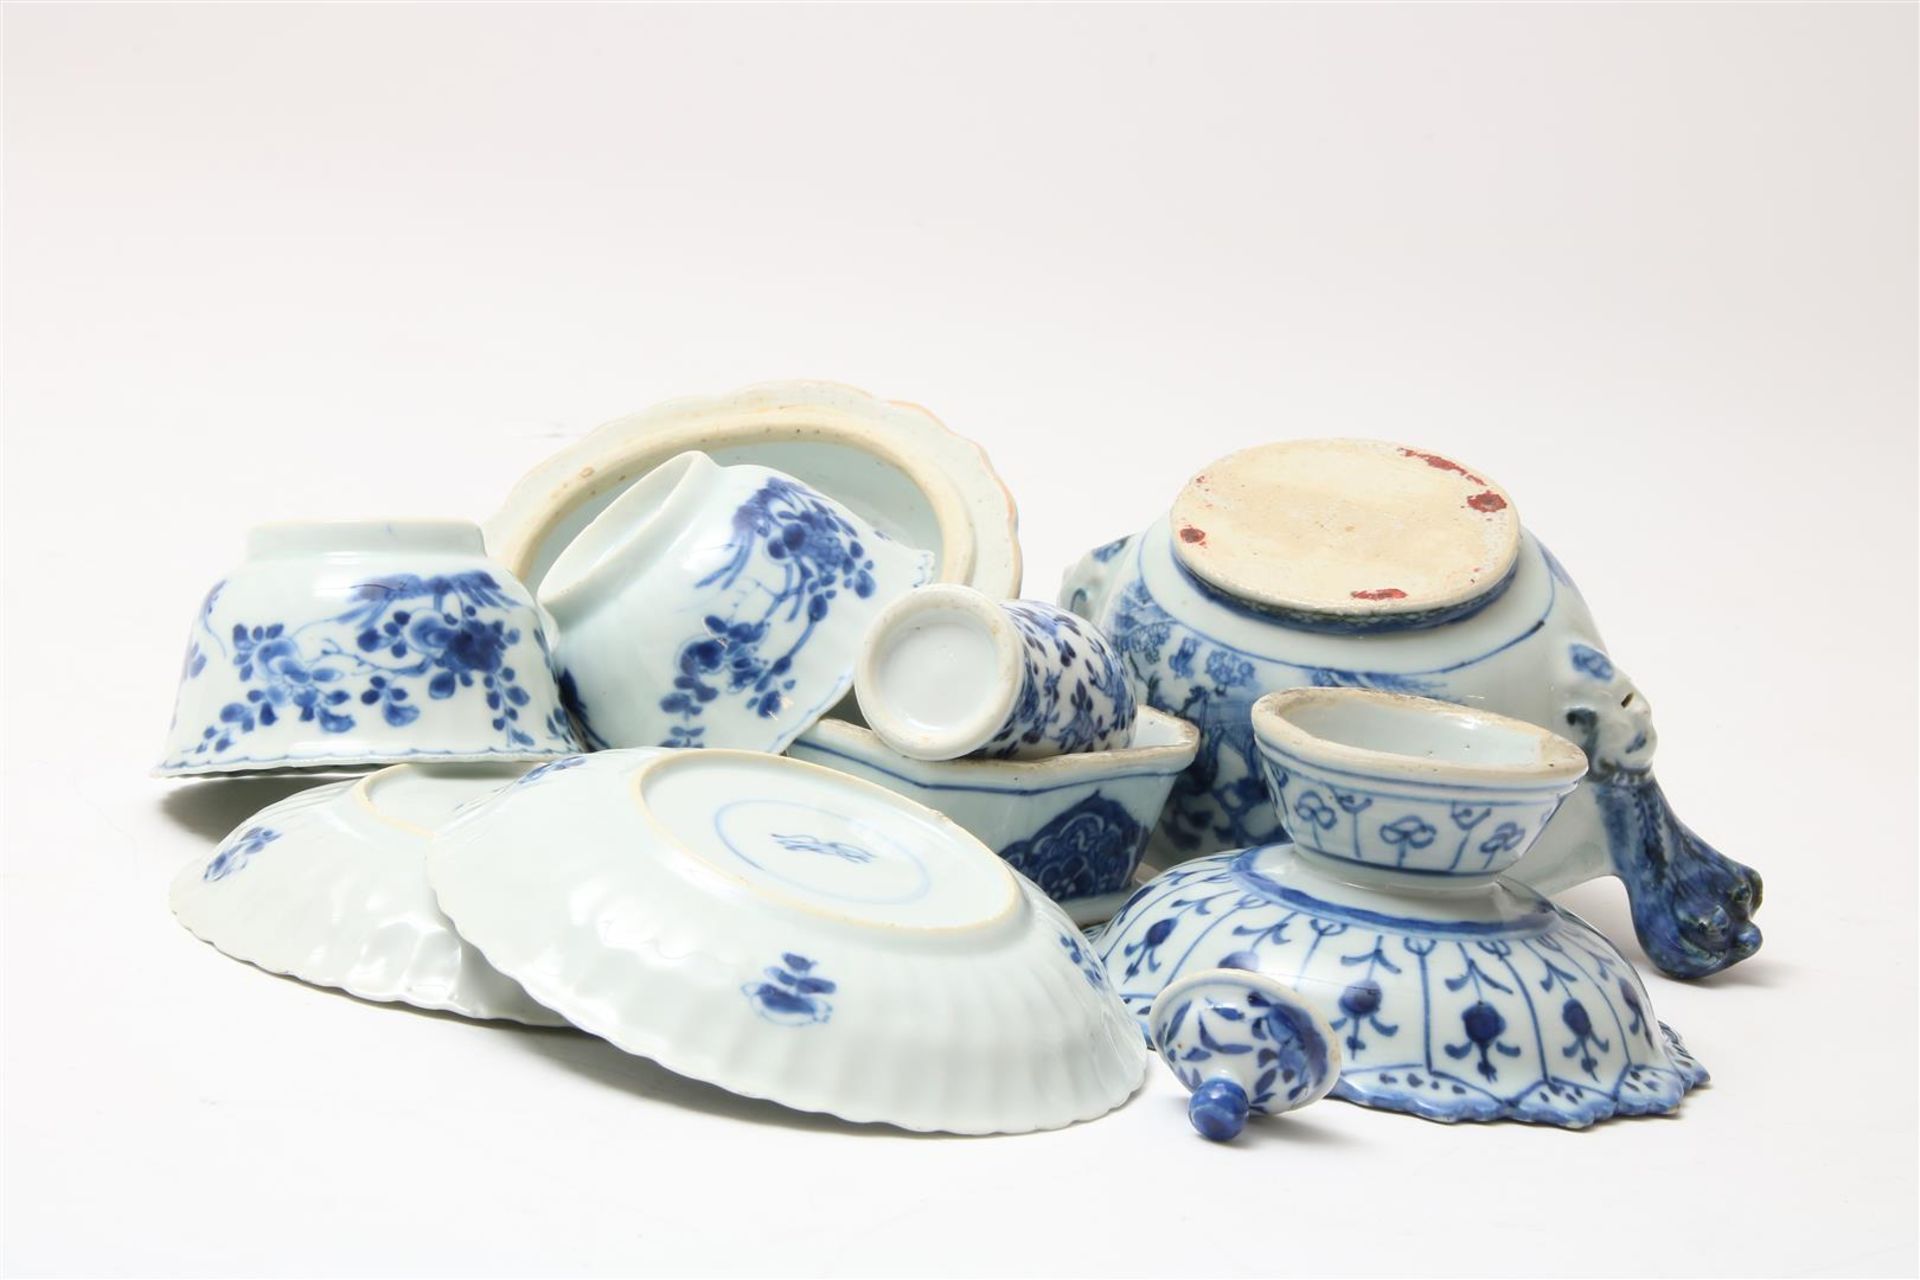 Lot of a pair of Kangxi cups and saucers with decoration of flowering shrubs, (1x saucer with - Image 4 of 6